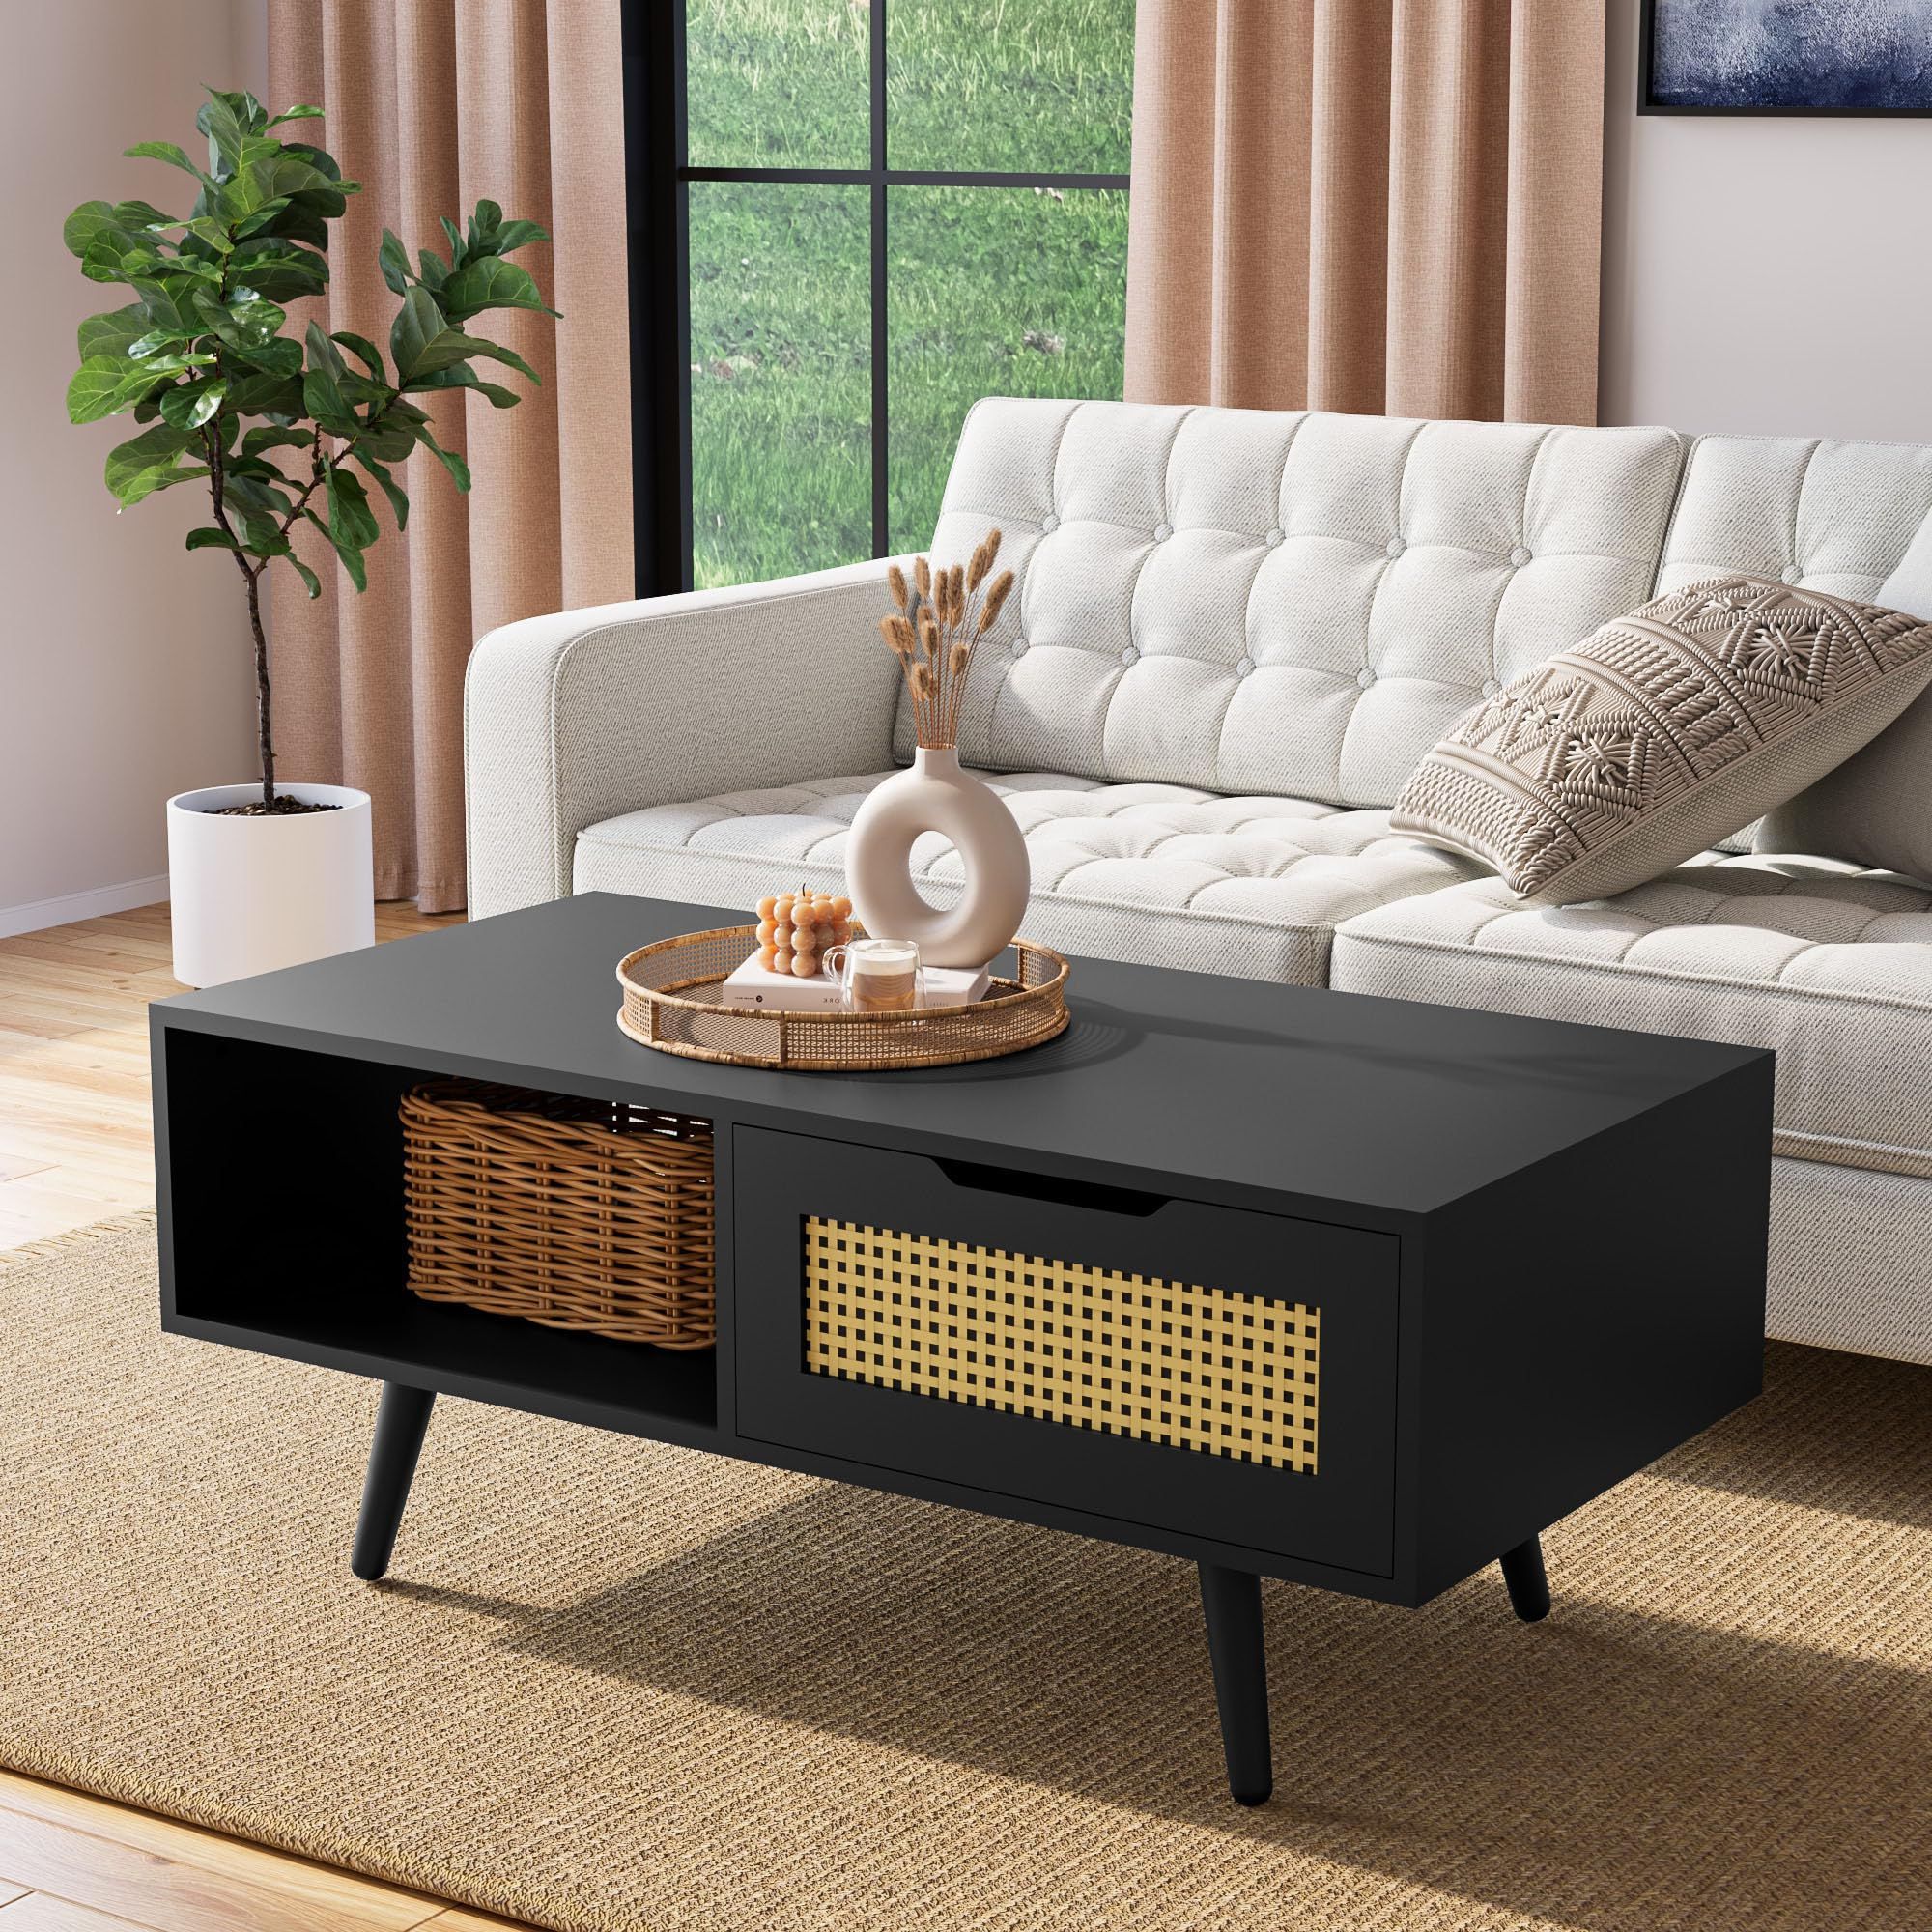 Well Known Cozy Castle Boho Living Room Tables For Amazon: Cozy Castle Boho Coffee Table With Storage, 39'' Rattan Living  Room Tables With Solid Legs, Mid Century Modern Coffee Table For Living Room,  Black : Home & Kitchen (View 2 of 10)